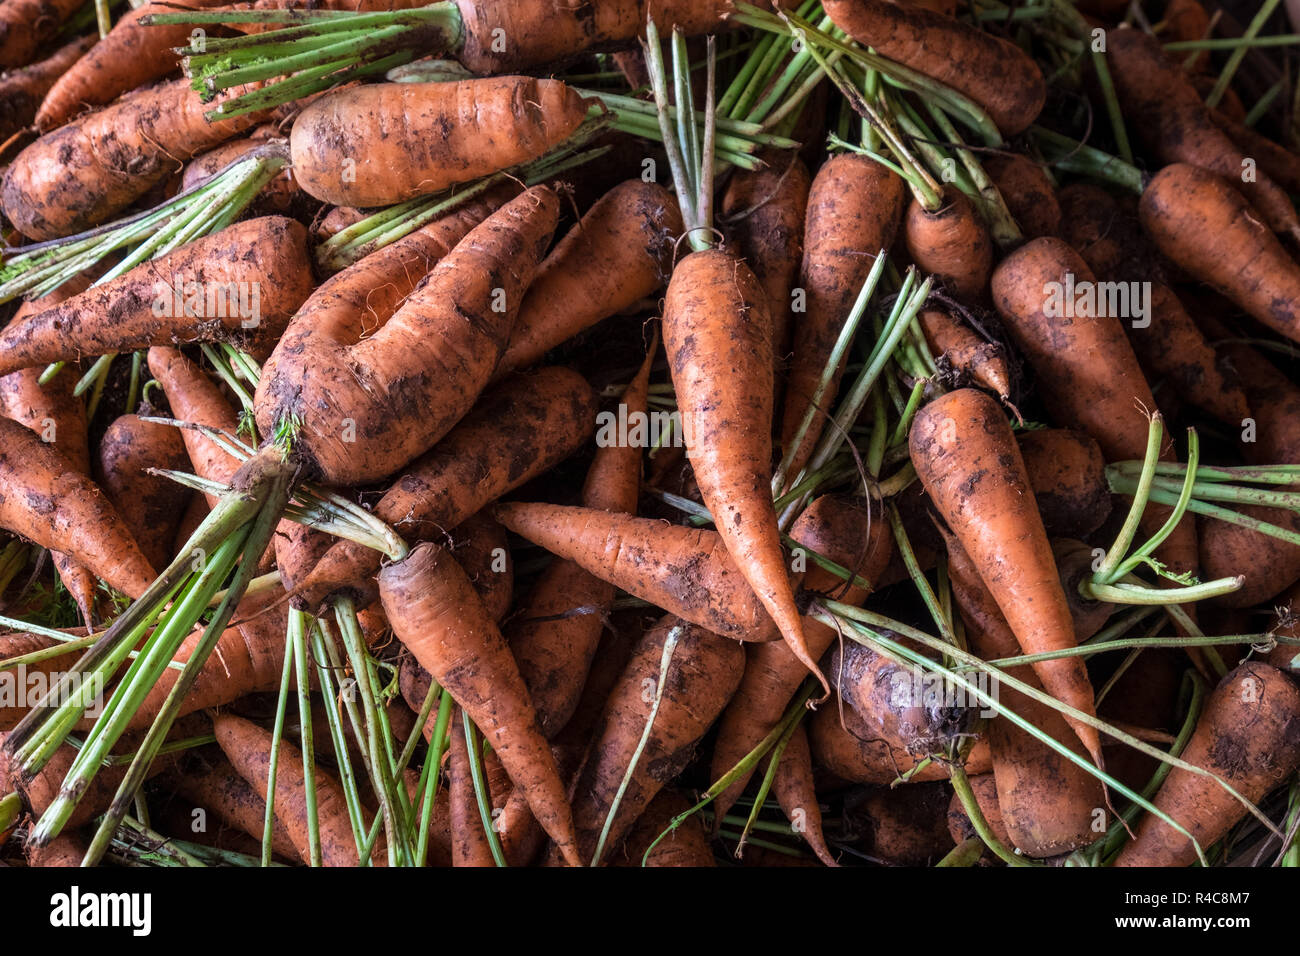 Carrots on display at a stall in Dong Ba Market in Hue, Vietnam Stock Photo